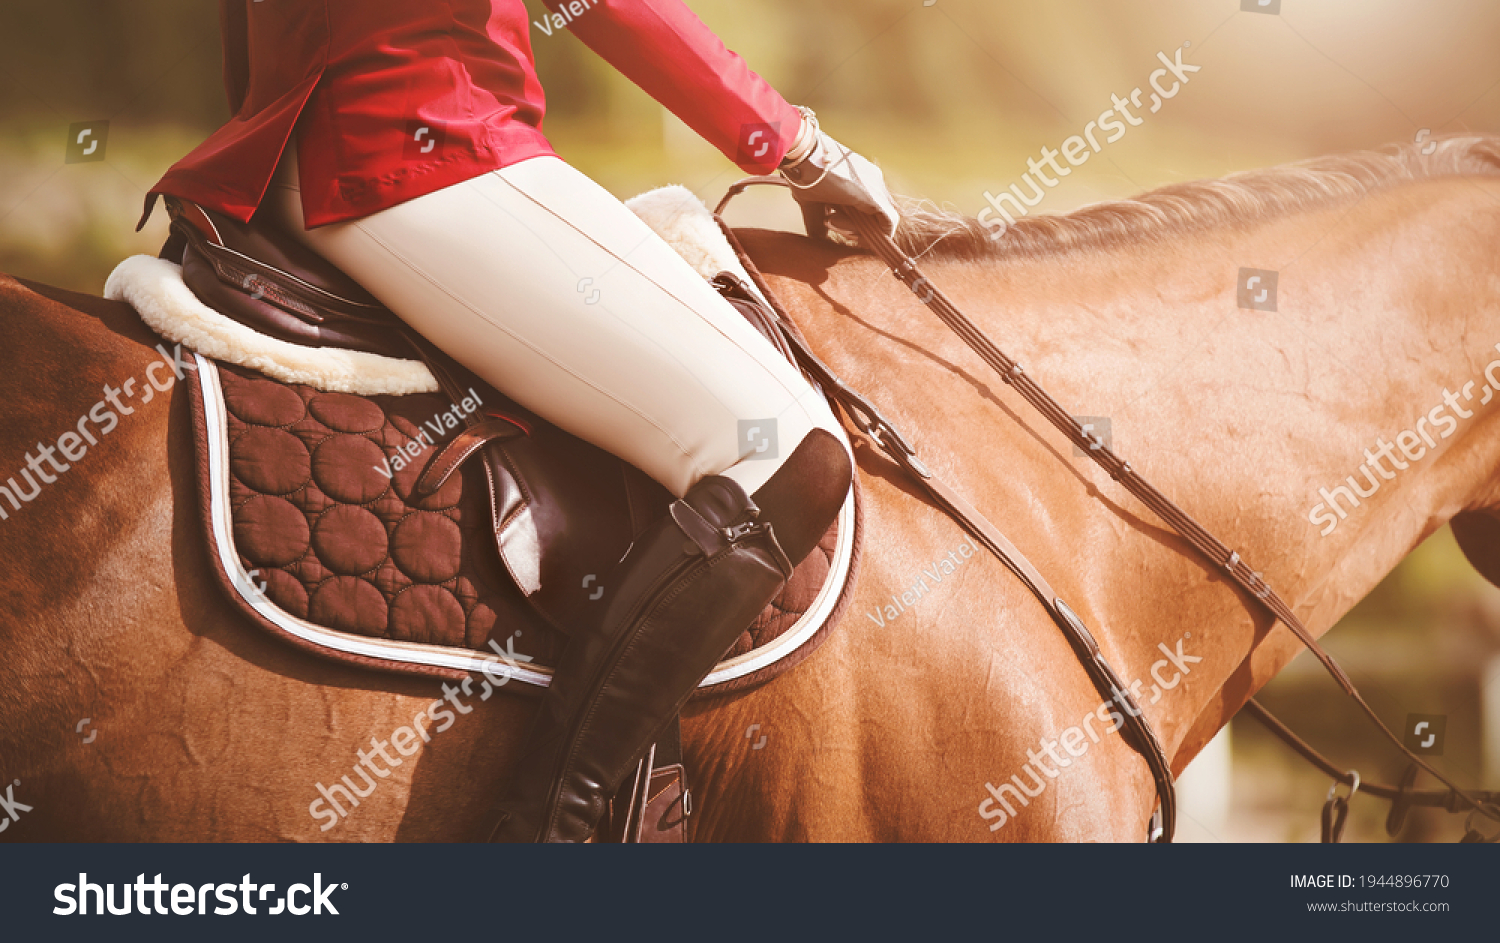 On a sorrel horse in a leather saddle sits a rider in a pink jacket and white trousers, holding the bridle rein in her hands, illuminated by the sun. #1944896770